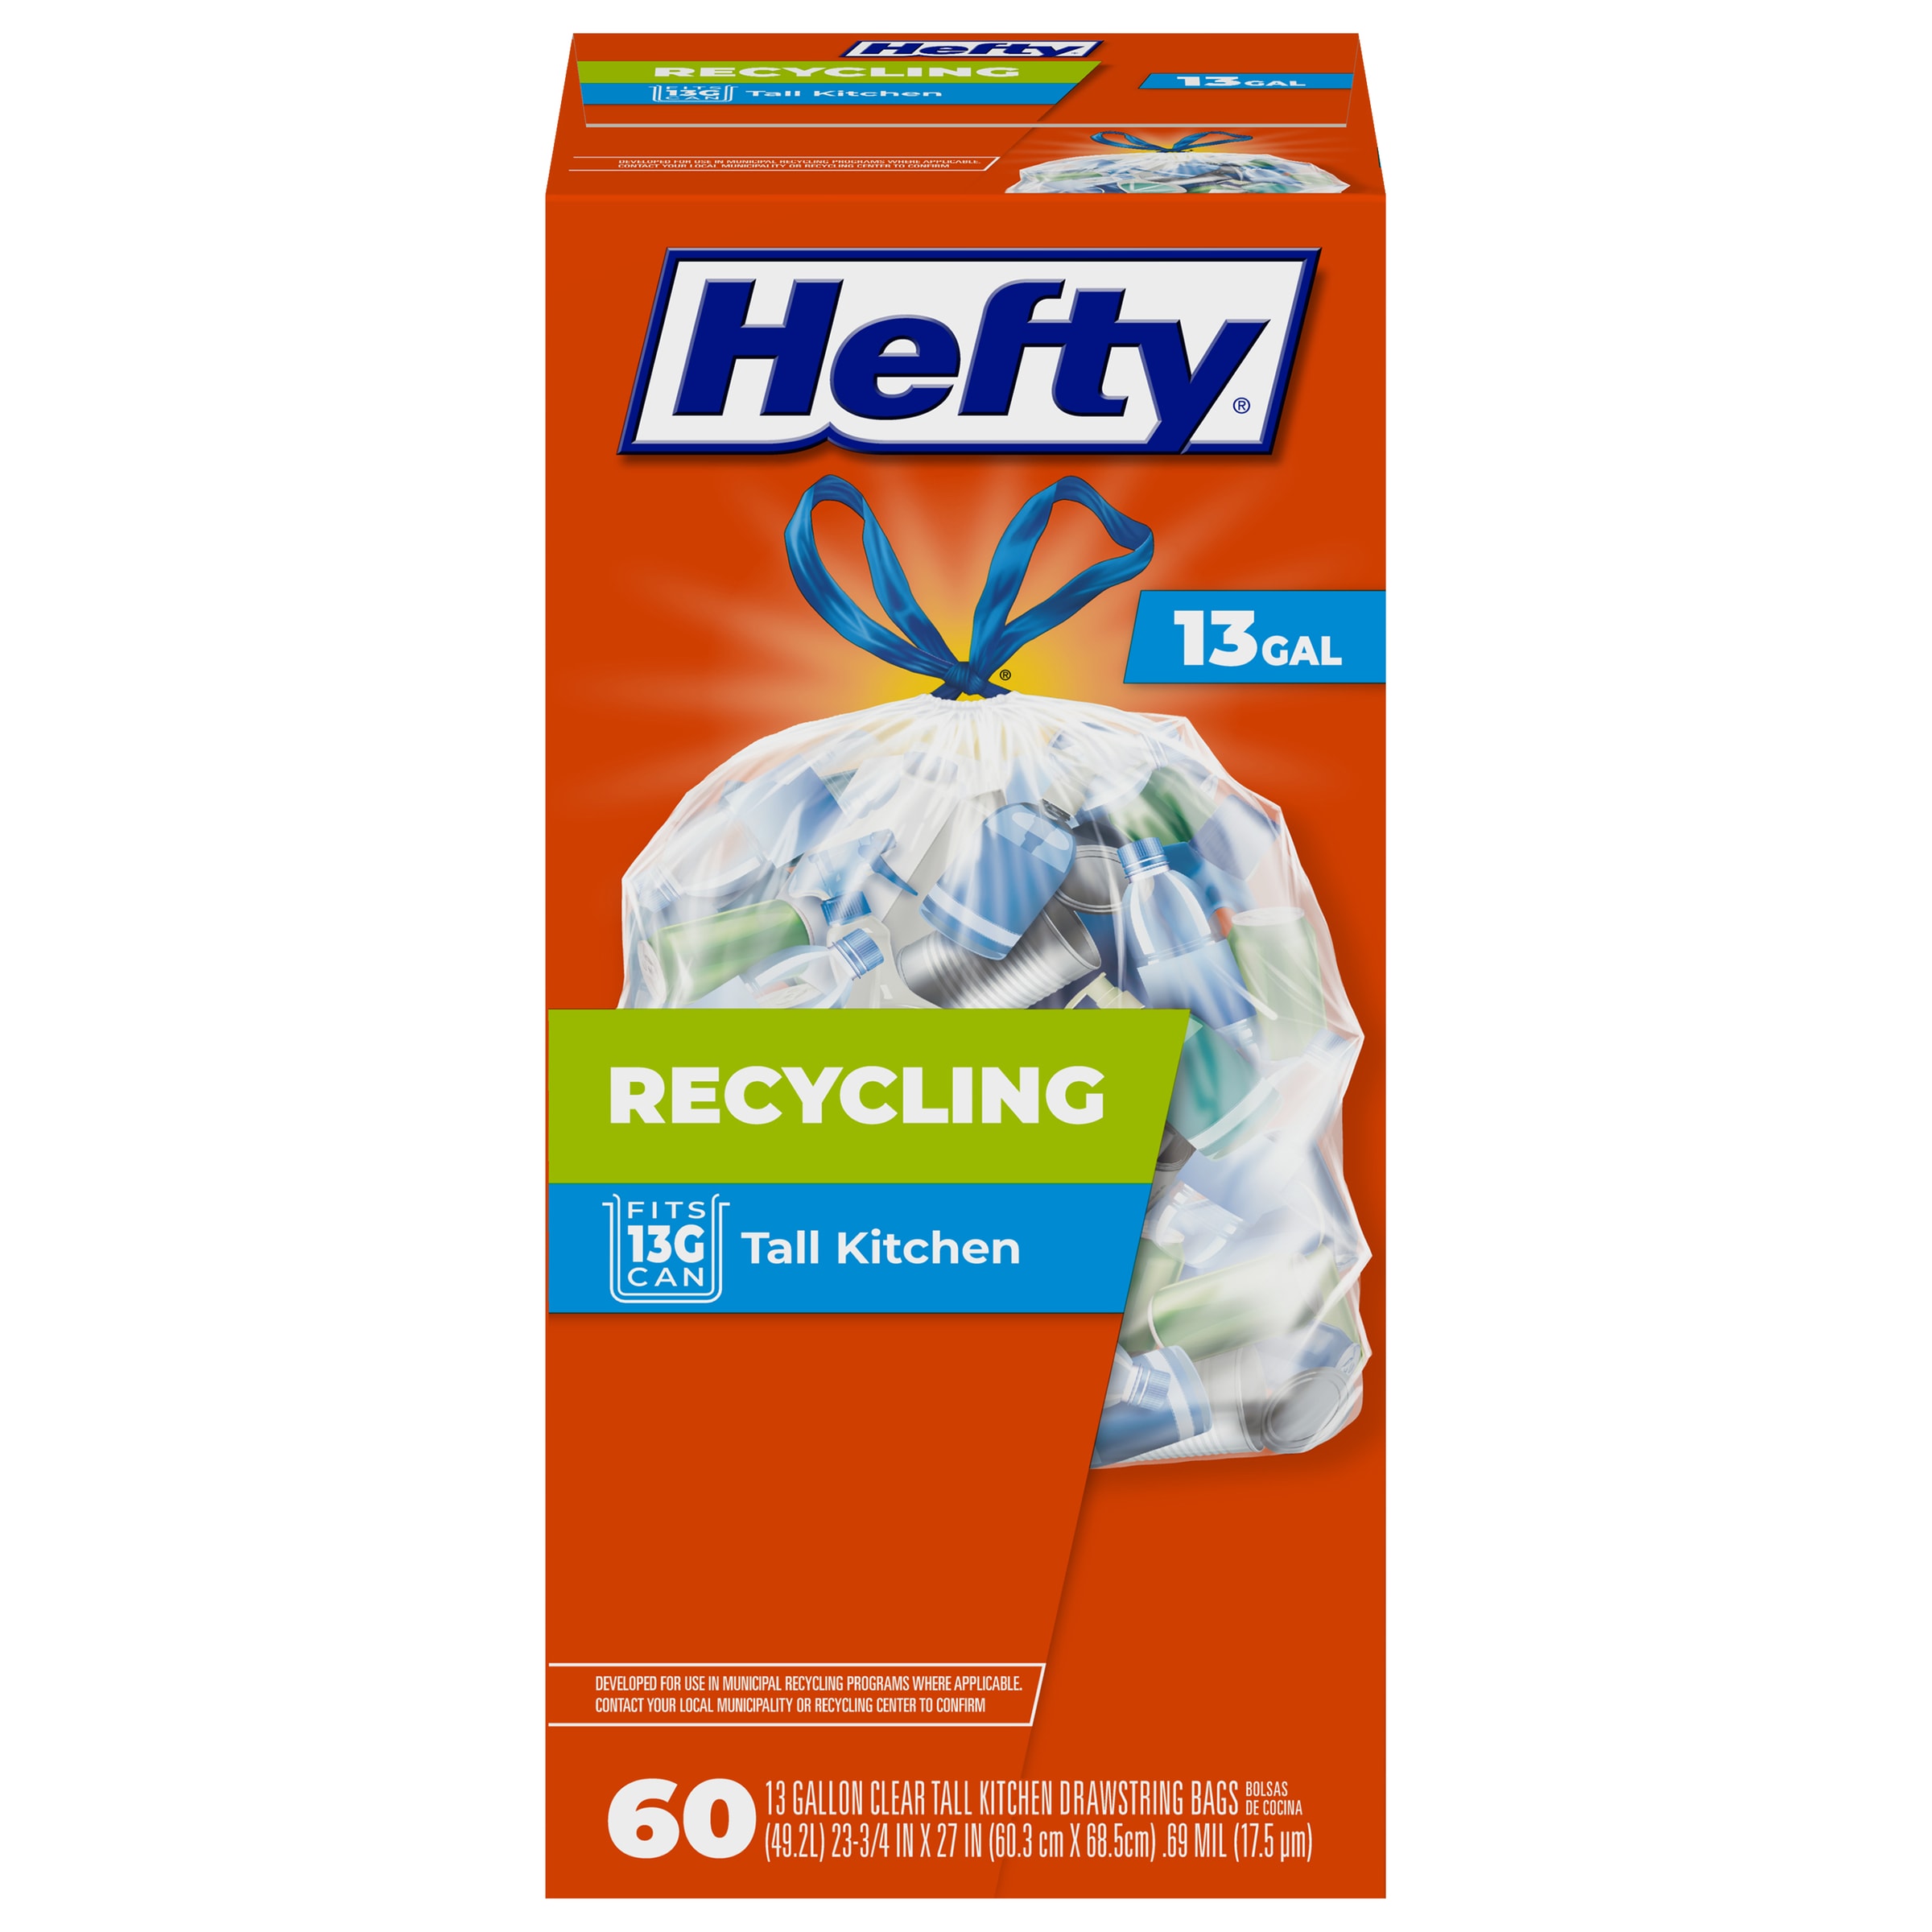 Hefty Ultra Strong Trash Bags, 13G 40ct Fabuloso Scent